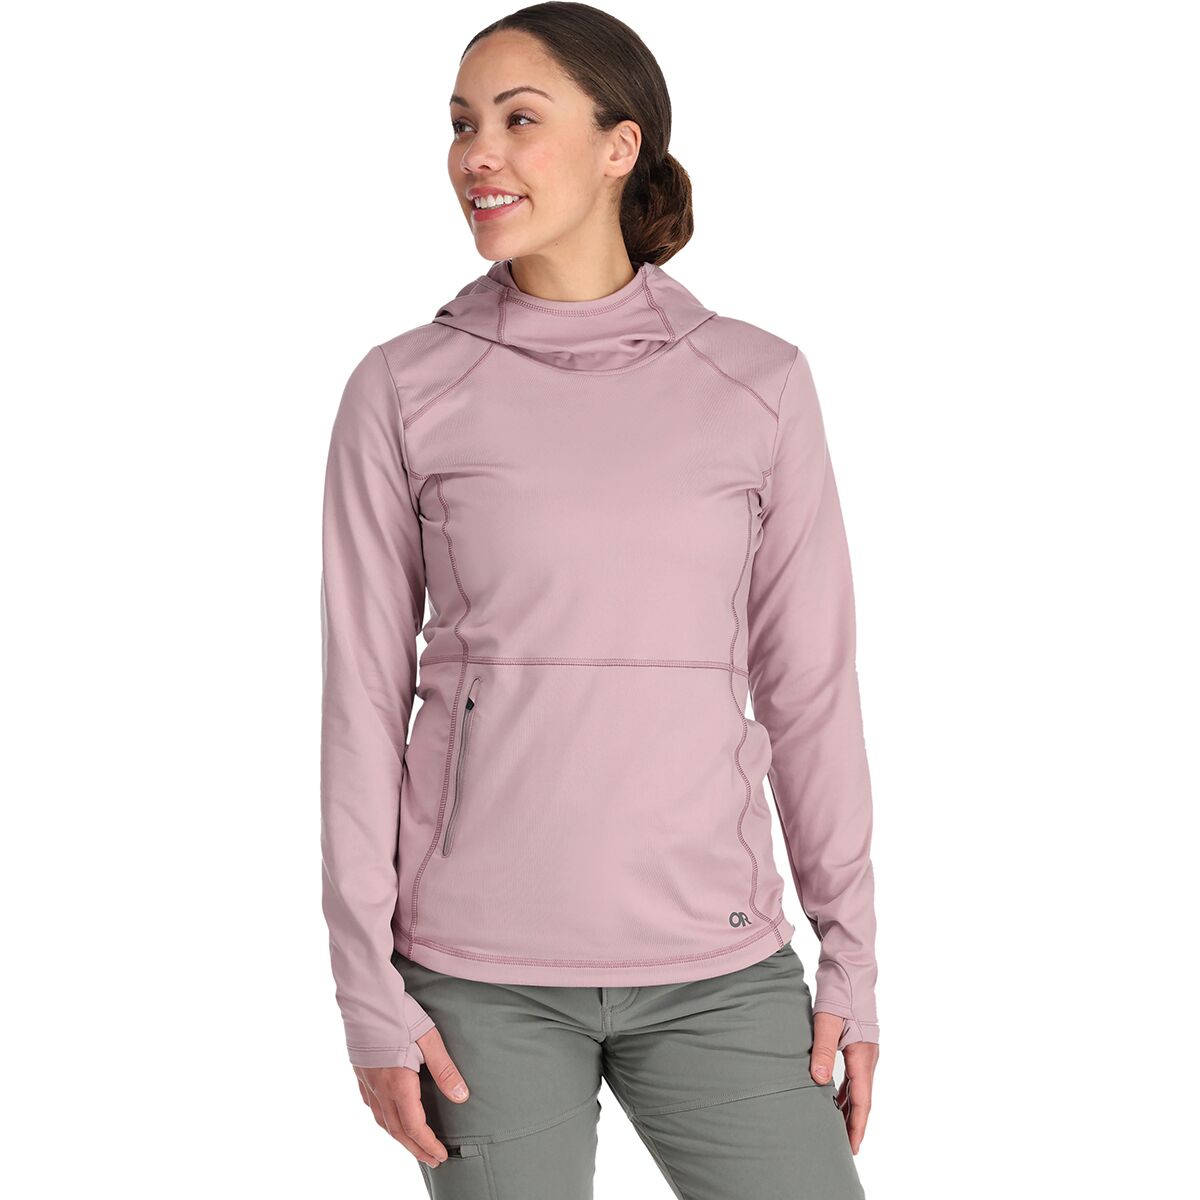 Outdoor Research Melody Pullover Hoodie - Women's